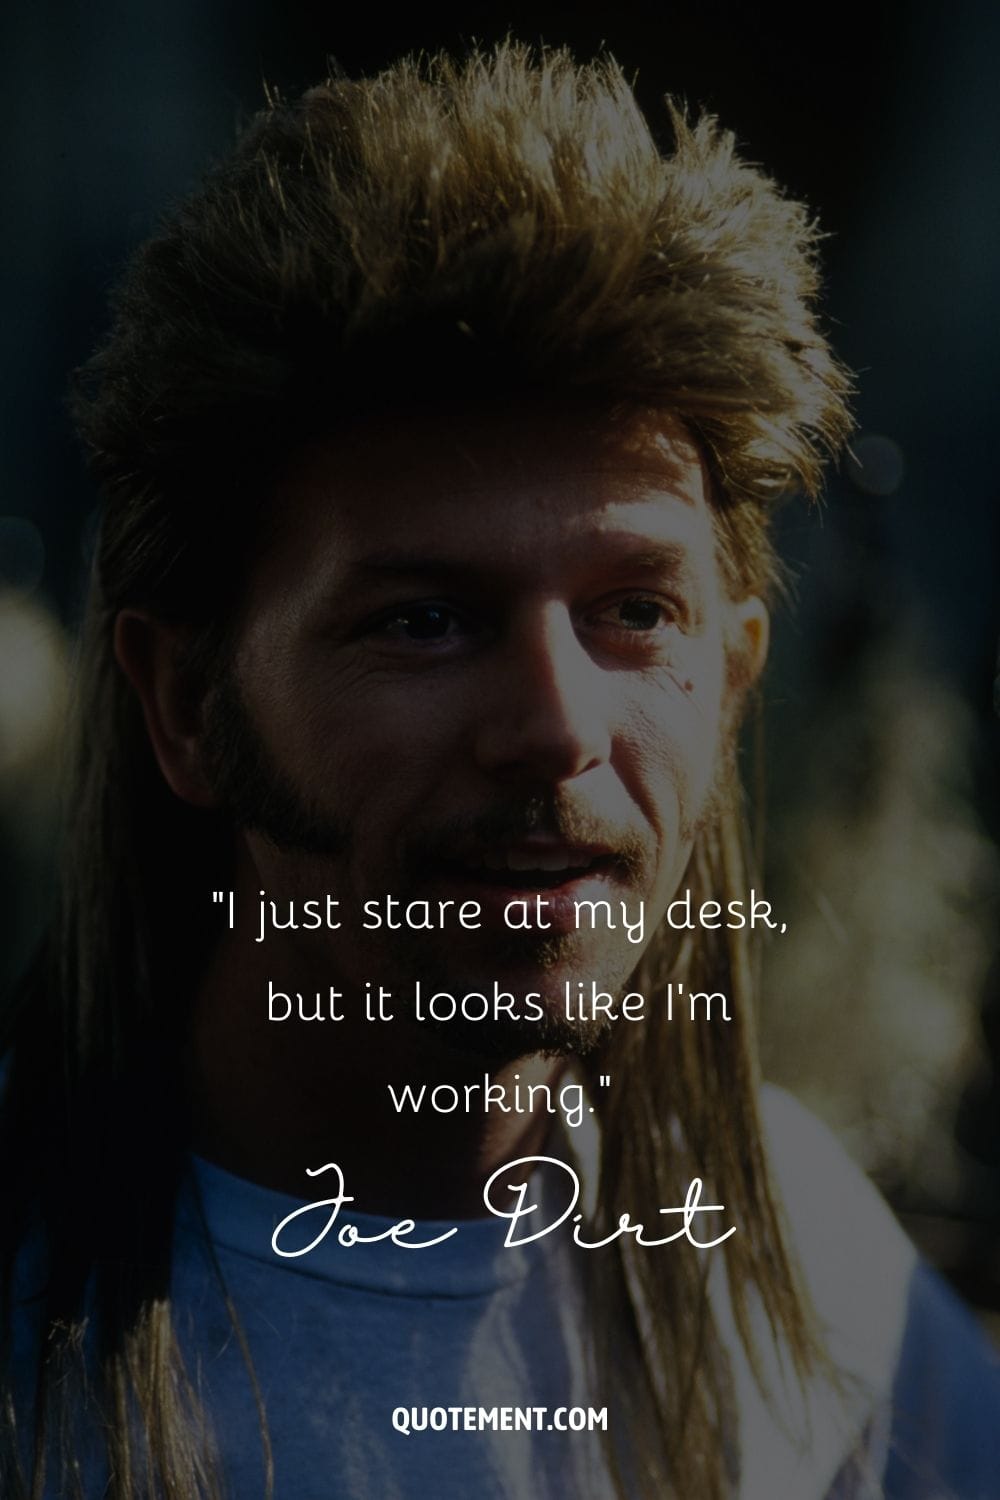 Iconic Joe Dirt in his signature style.